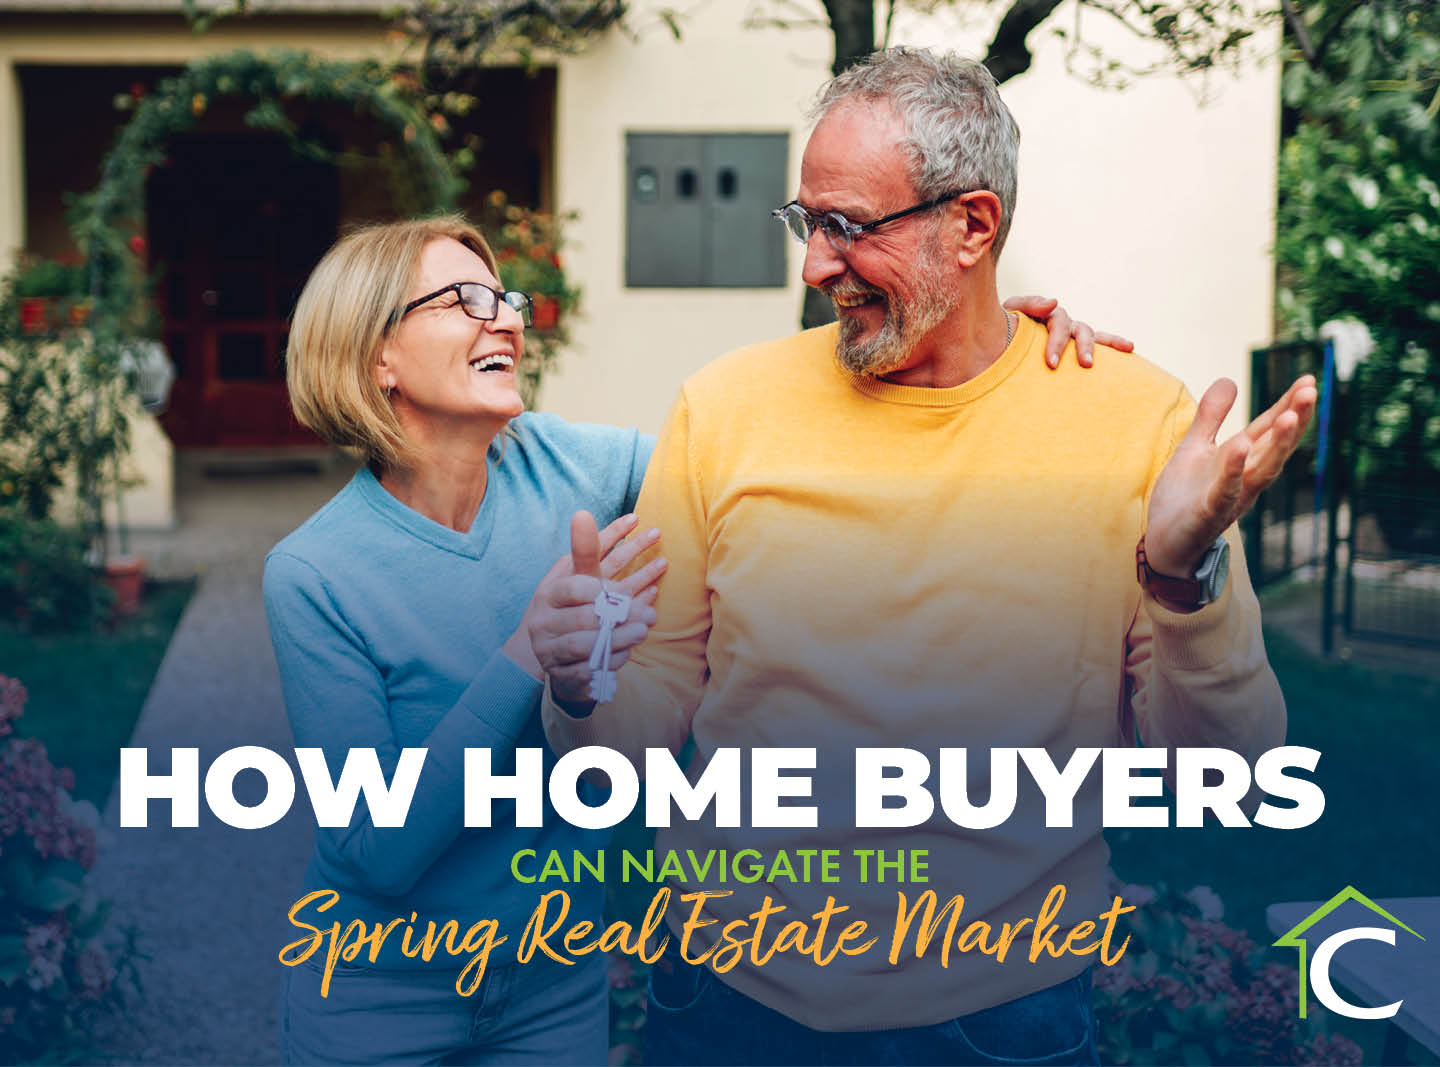 How Home Buyers Can Navigate the Spring Real Estate Market